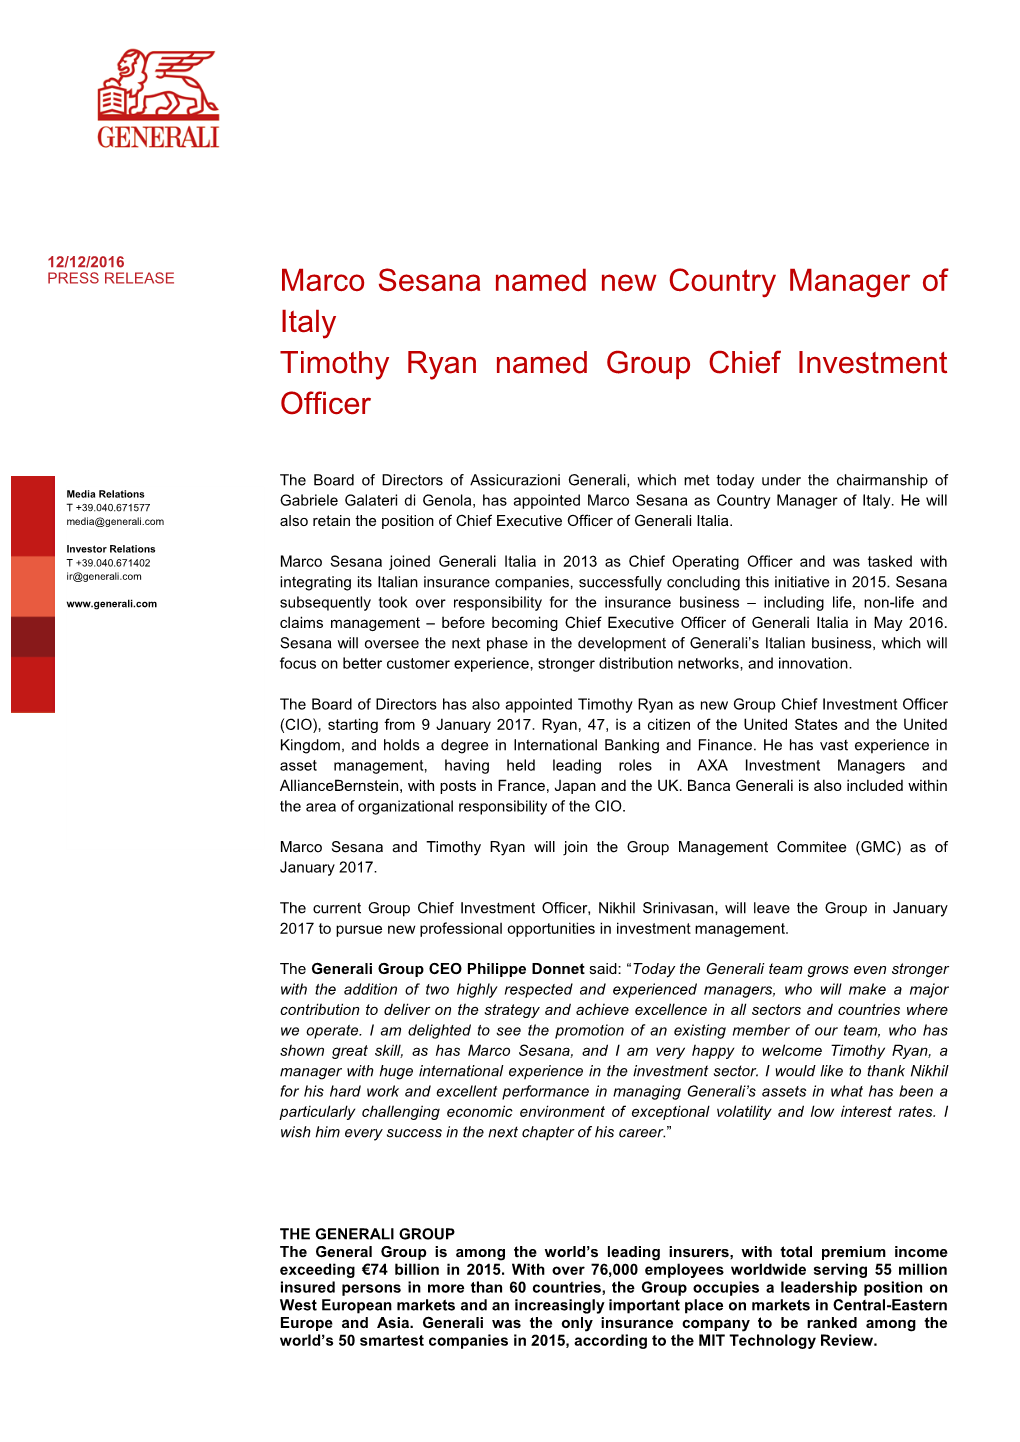 Marco Sesana Named New Country Manager of Italy Timothy Ryan Named Group Chief Investment Officer